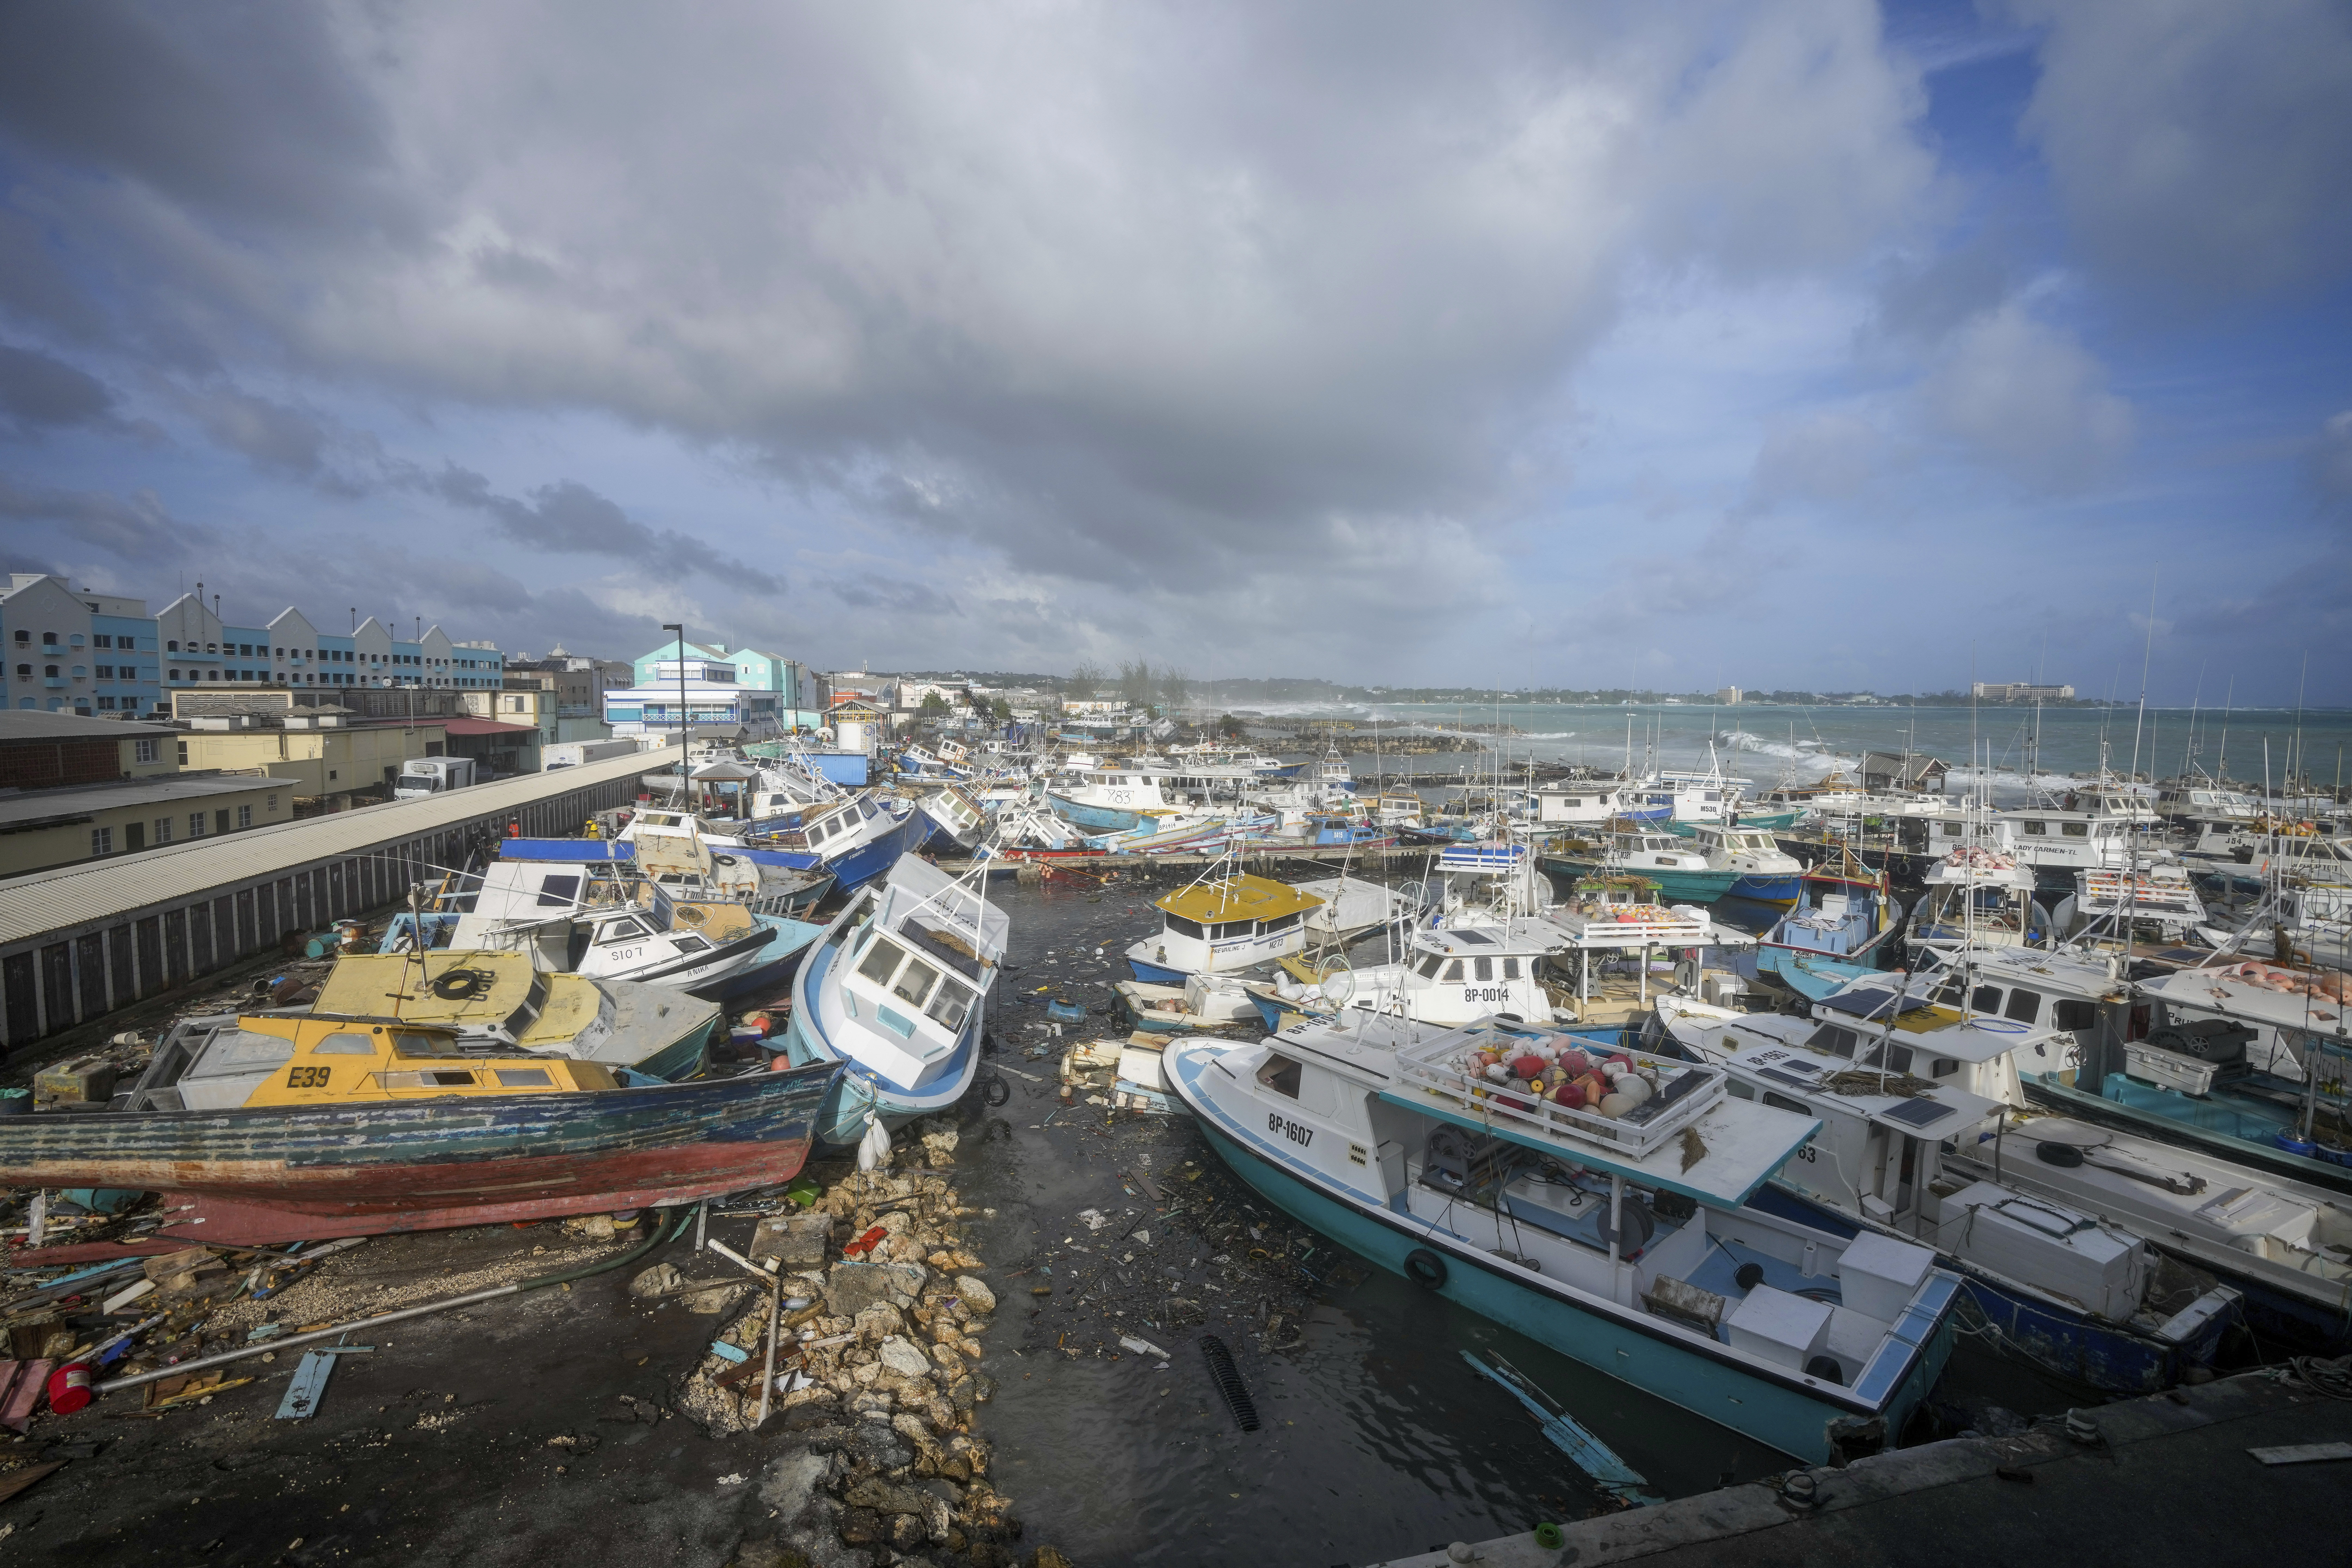 Grenadian Montrealers come to terms with devastation from Hurricane Beryl